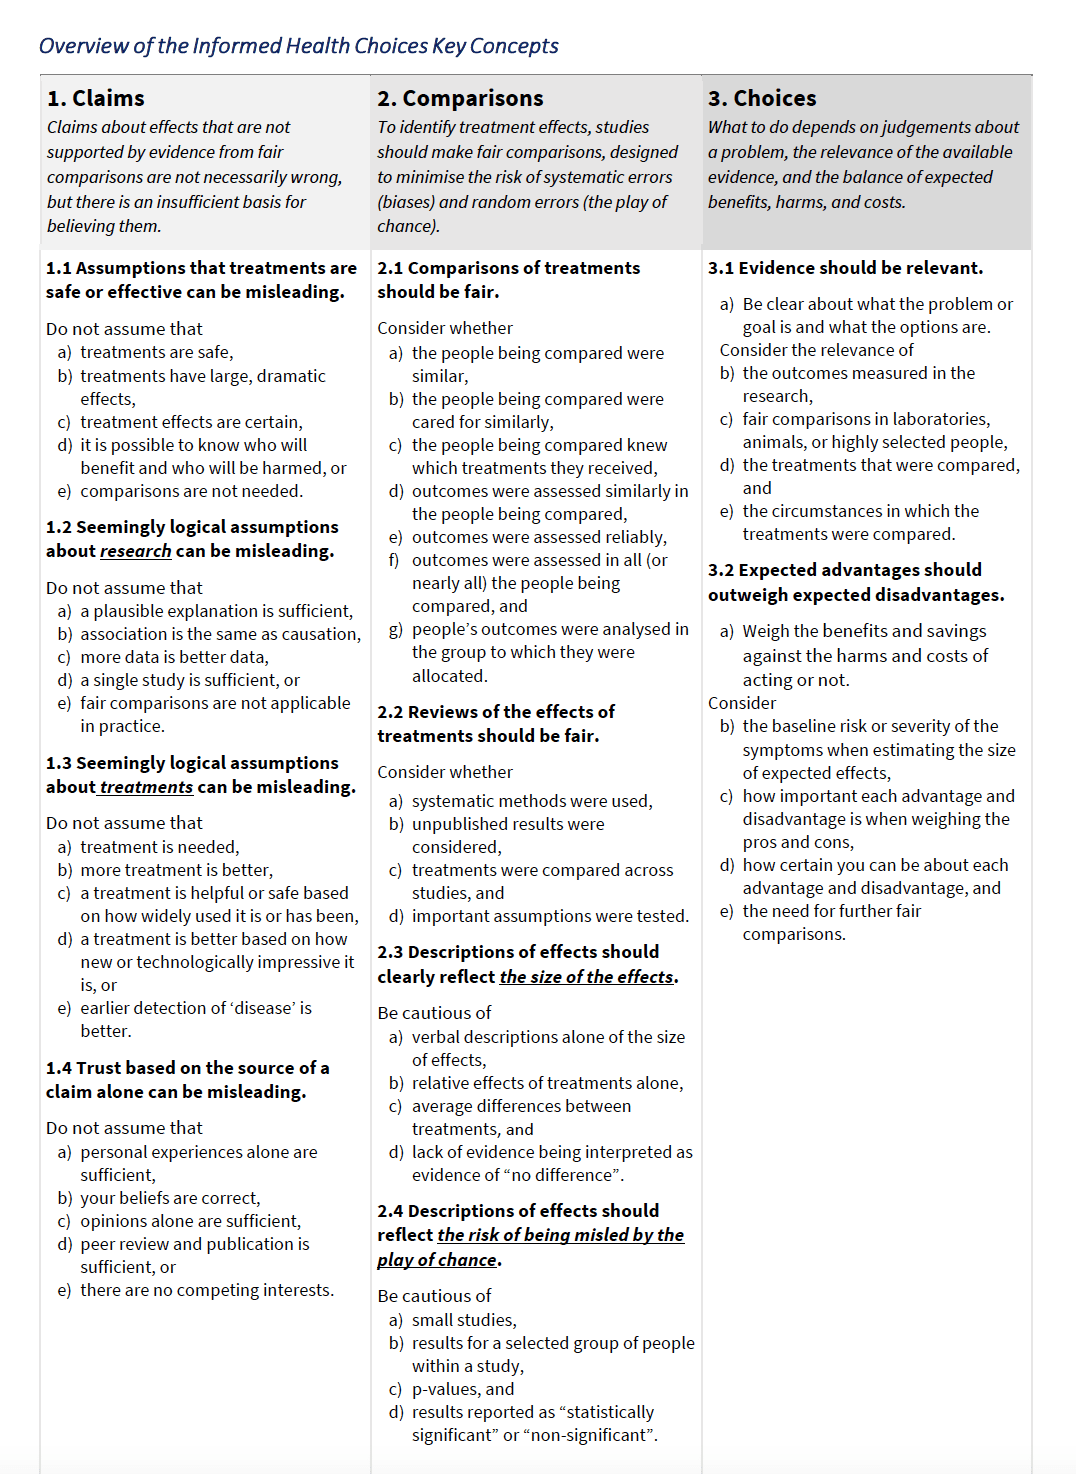 Table overview of all Key Concepts